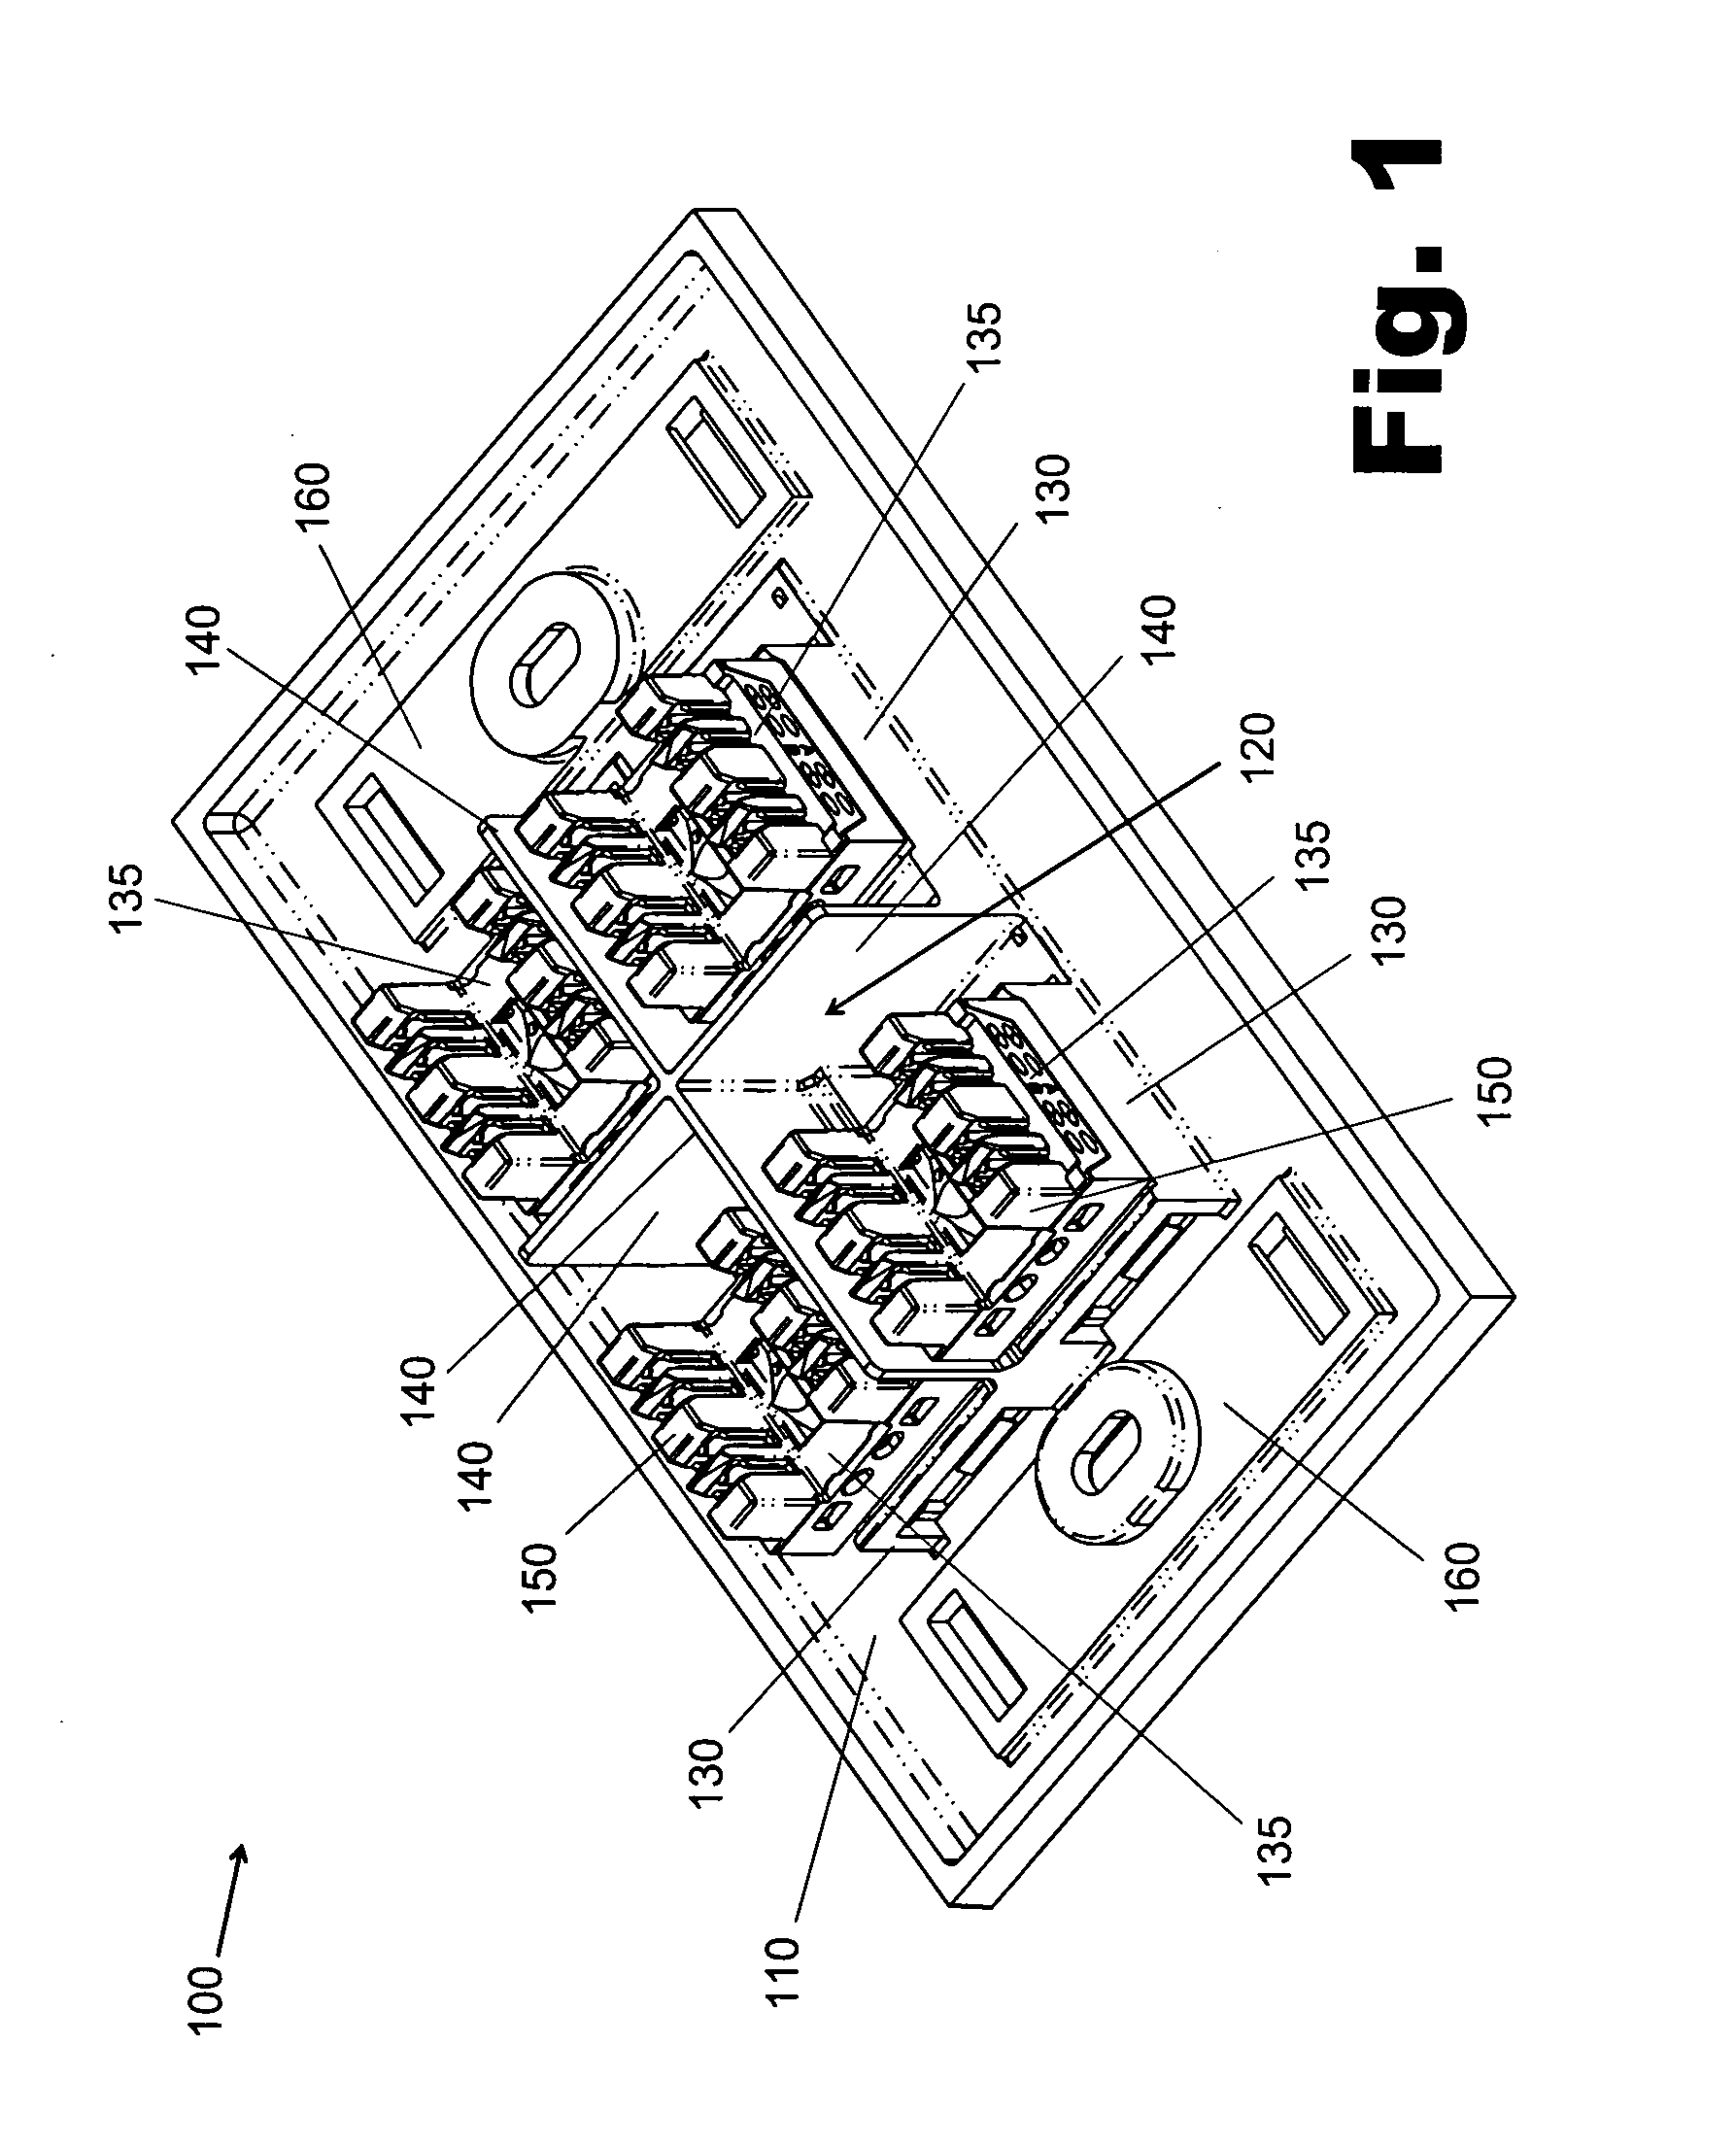 Methods and systems for positioning connectors to minimize alien crosstalk